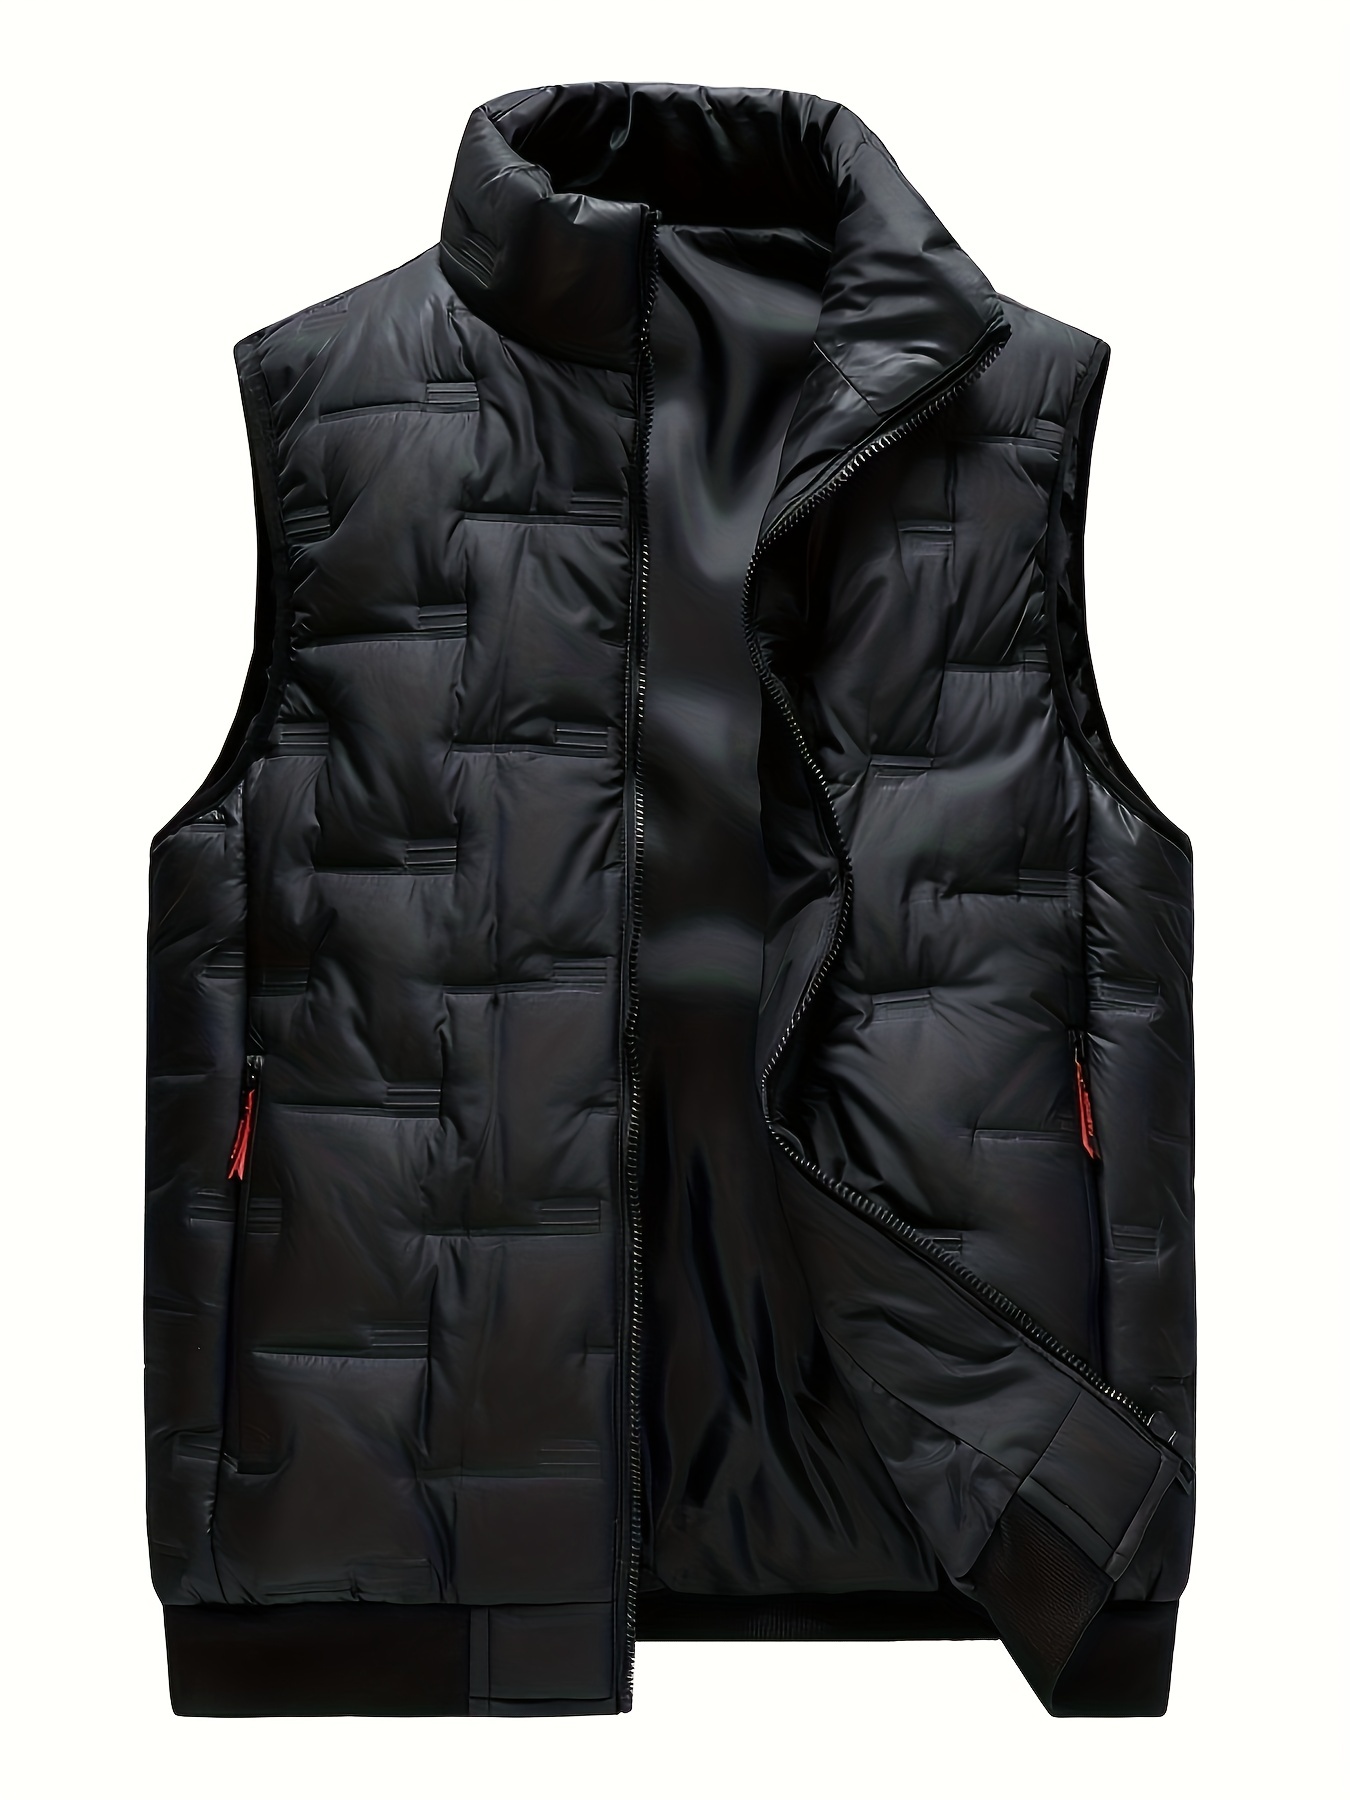 Plus Size Men's Letters Graphic Print Puffer Vest Sleeveless Padded Jacket  For Fall Winter, Men's Clothing